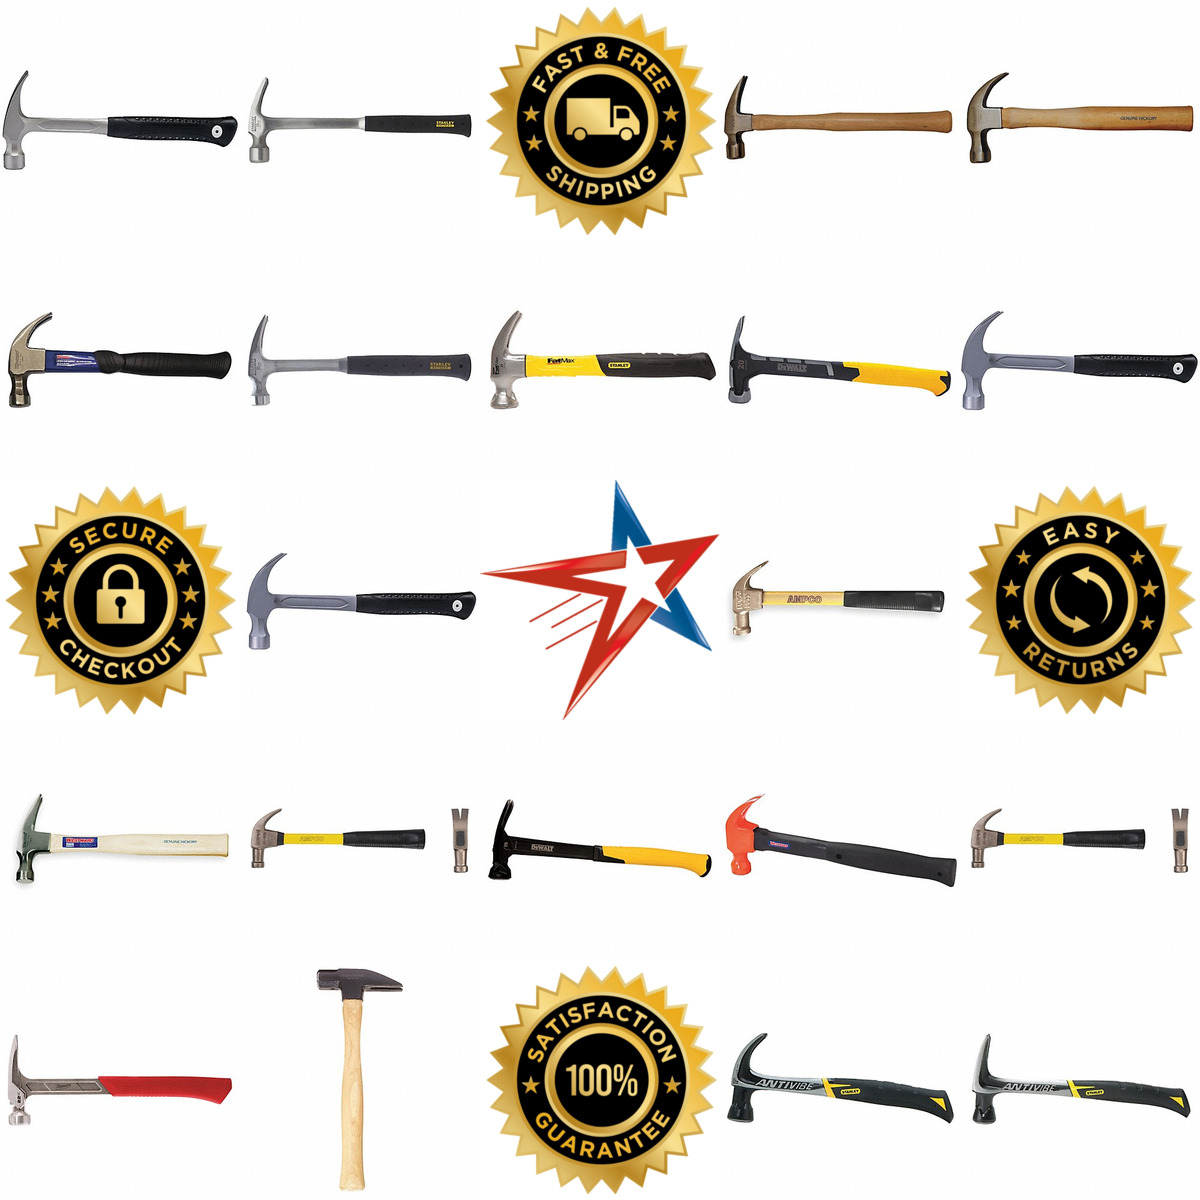 A selection of Claw Hammers products on GoVets